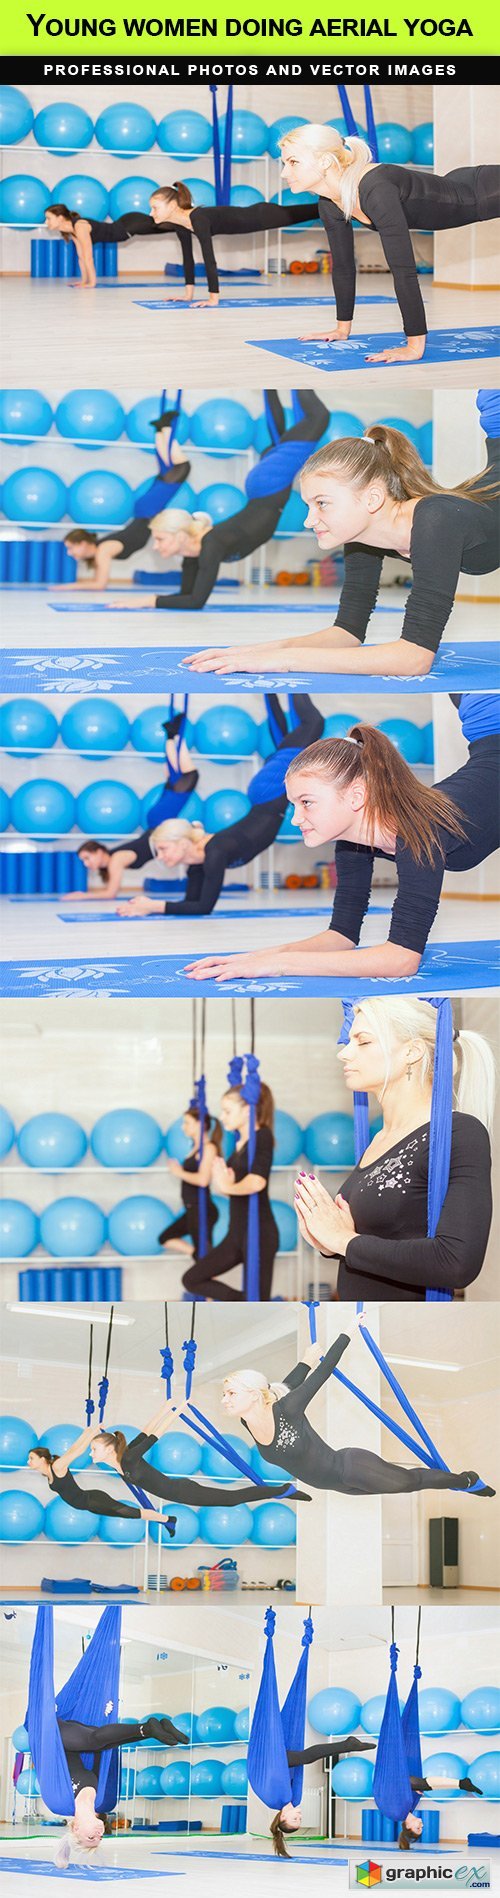 Young women doing aerial yoga